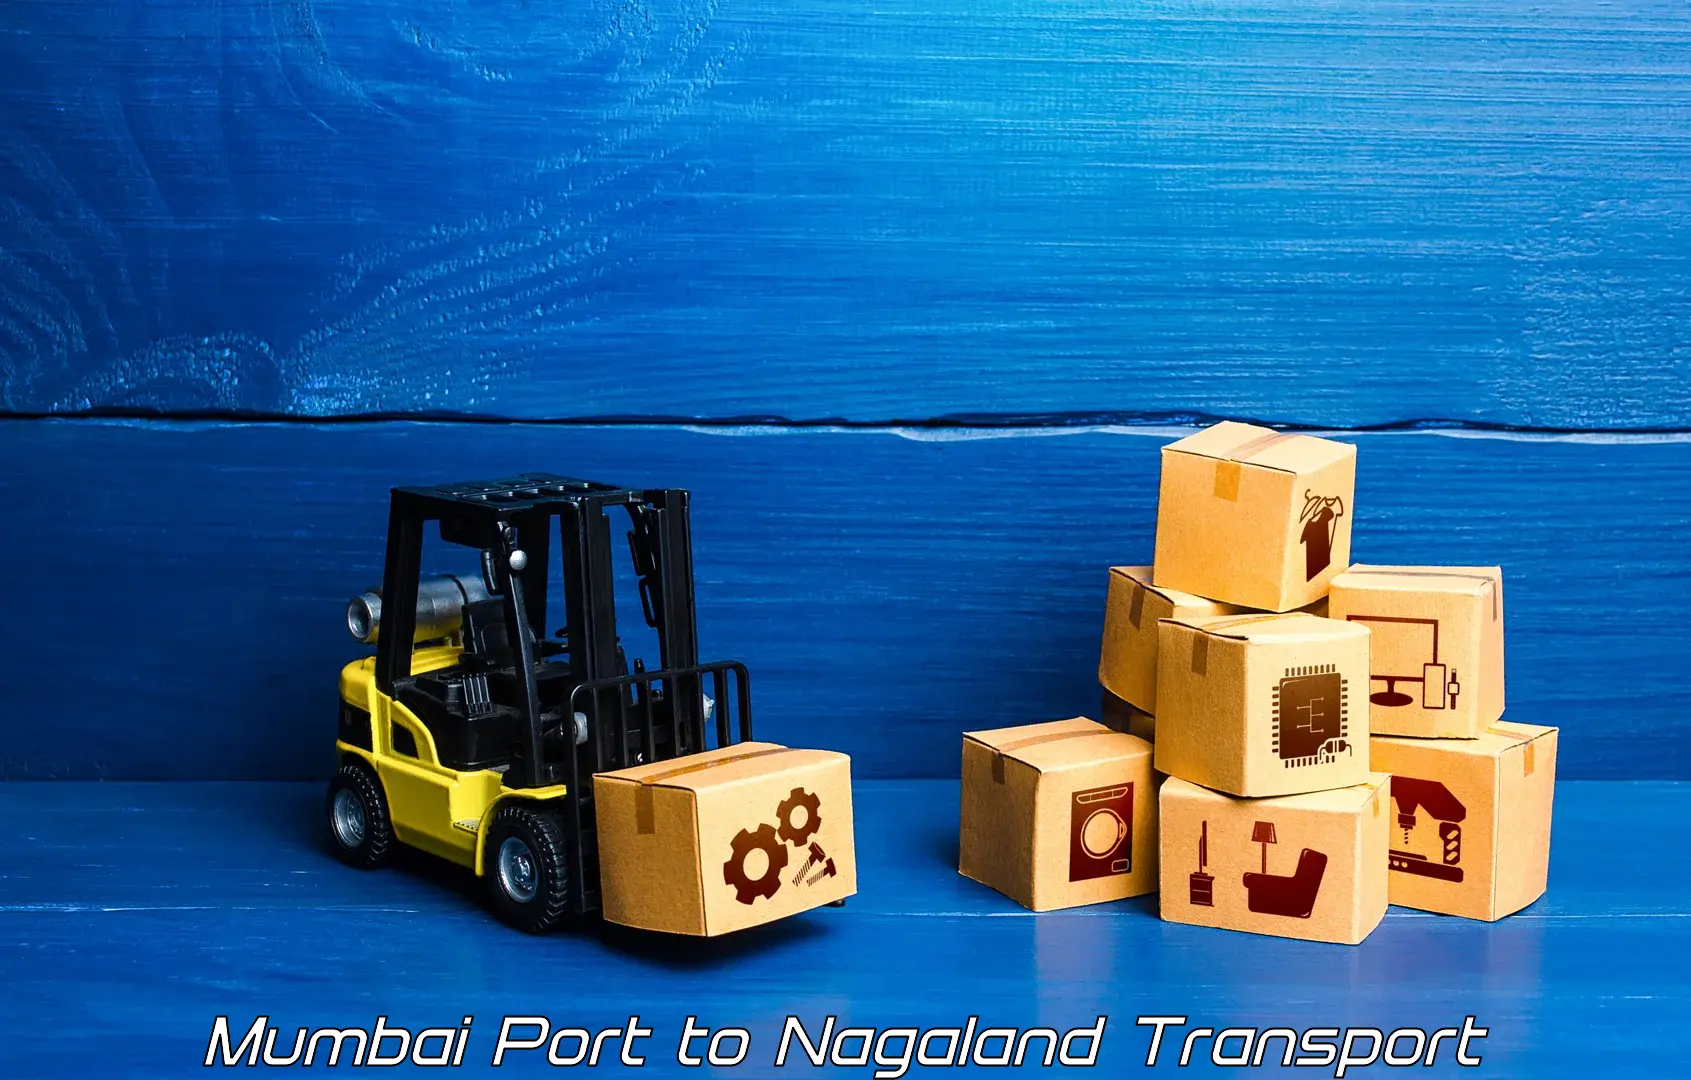 Part load transport service in India in Mumbai Port to Mon